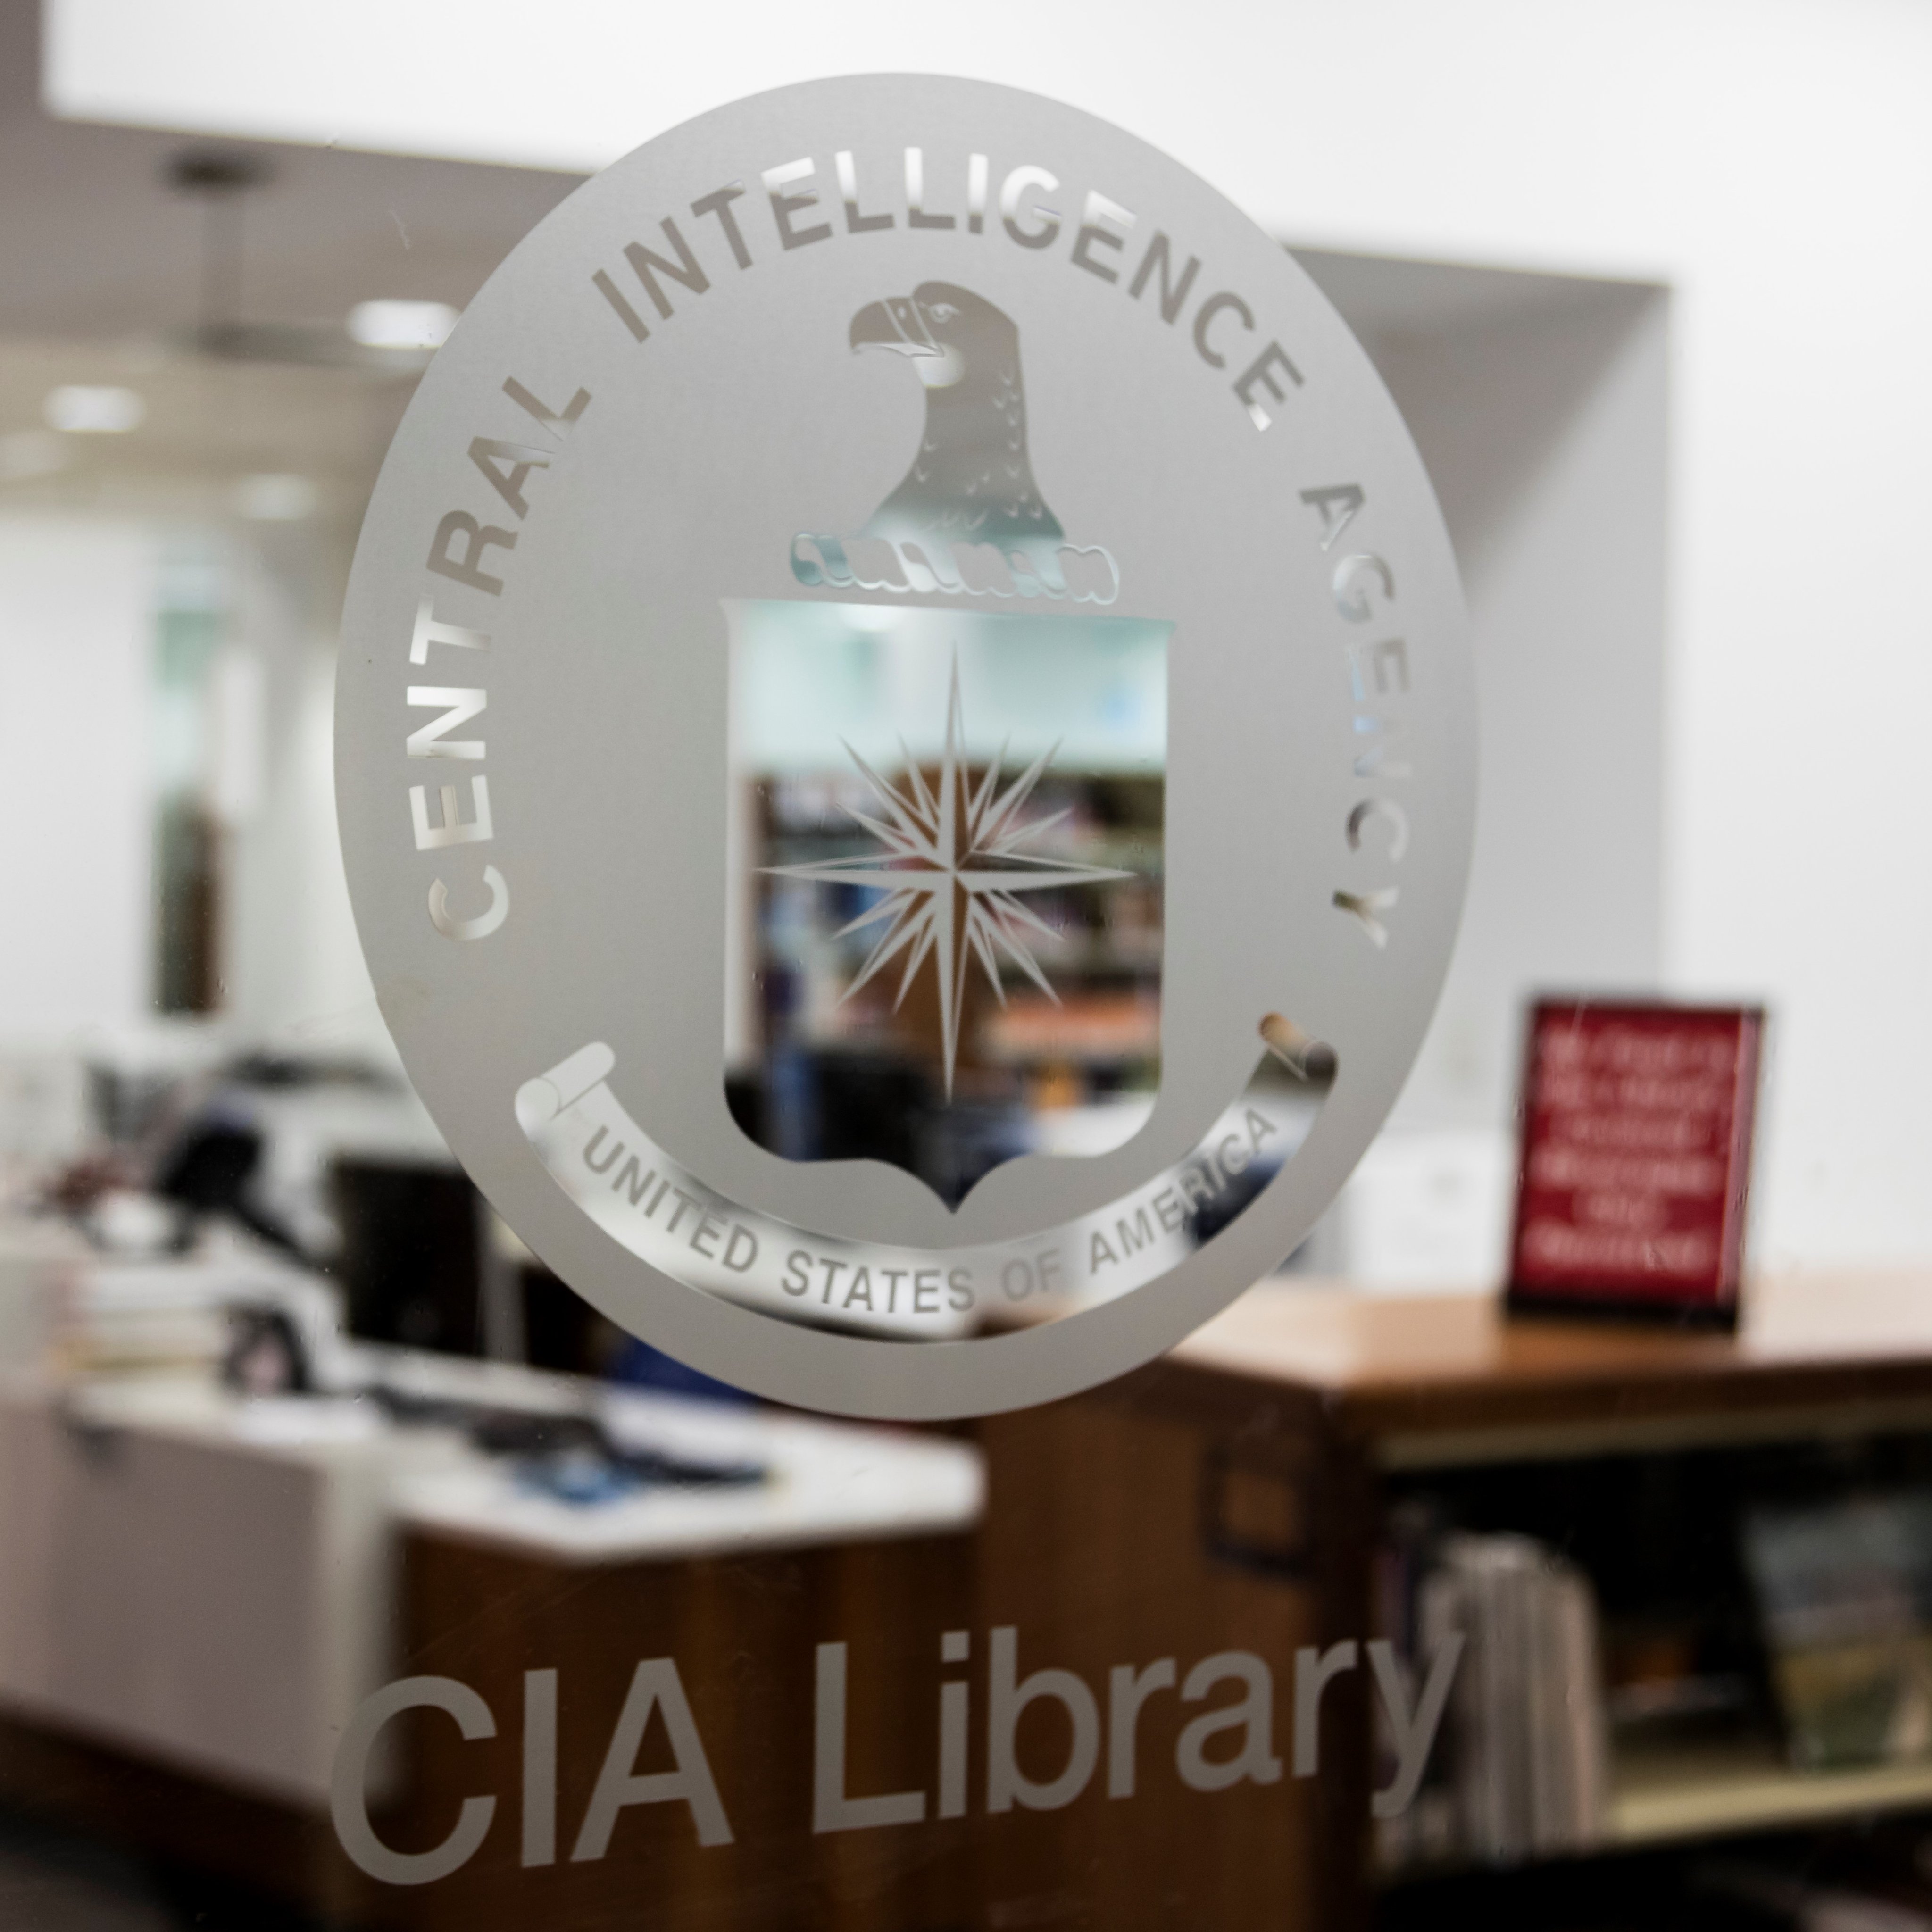 Central Intelligence Agency (CIA) Library